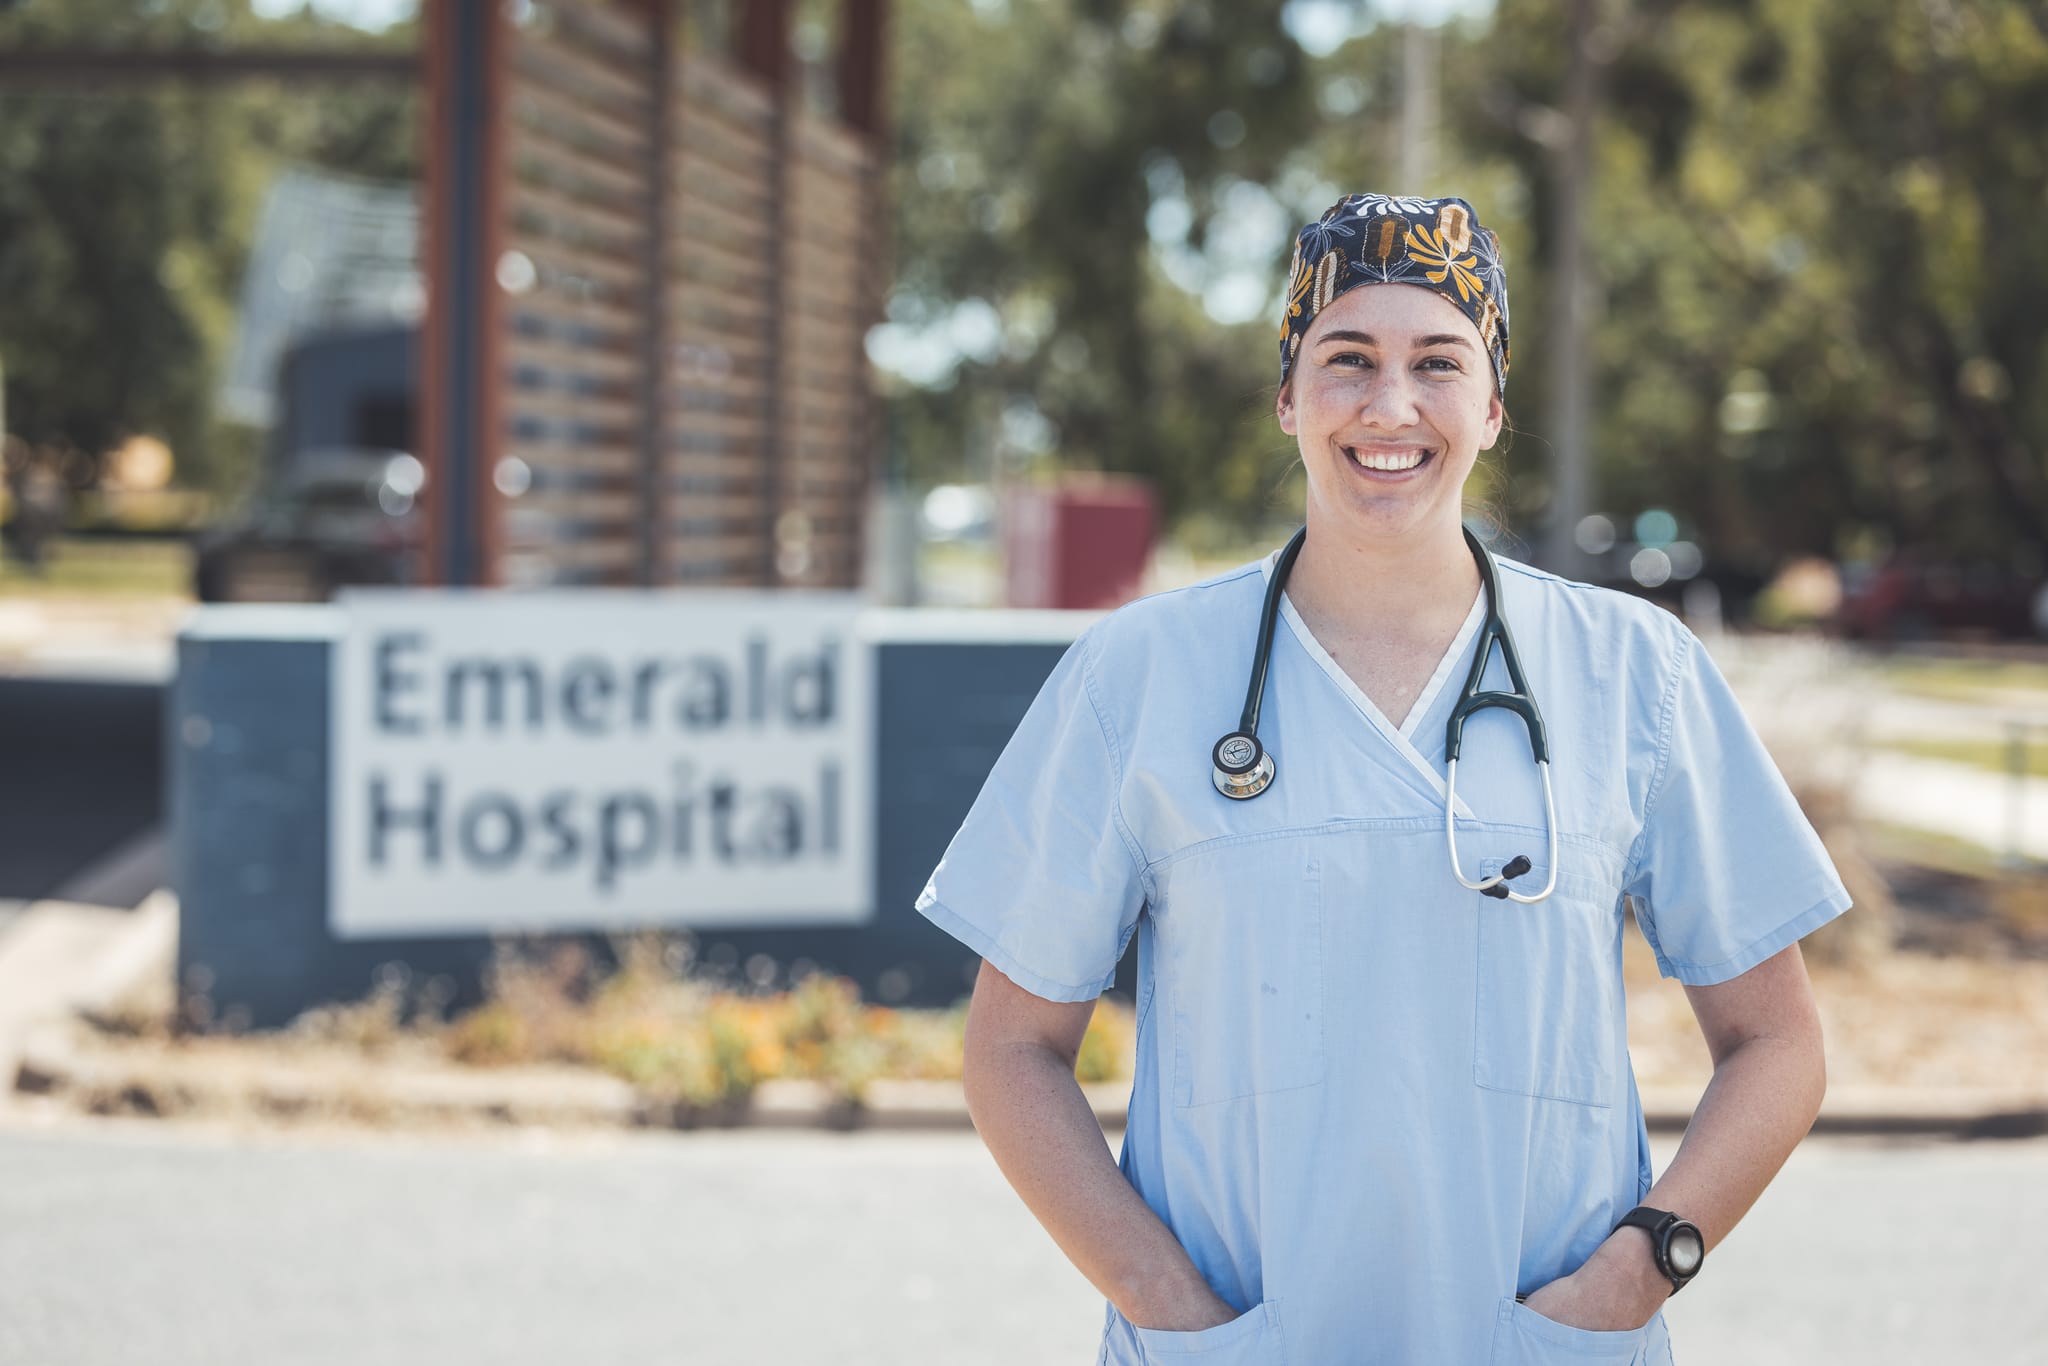 A female medical worker dressed in scrubs and wearing a stethoscope standing outside a sign for Emerald Hospital. 